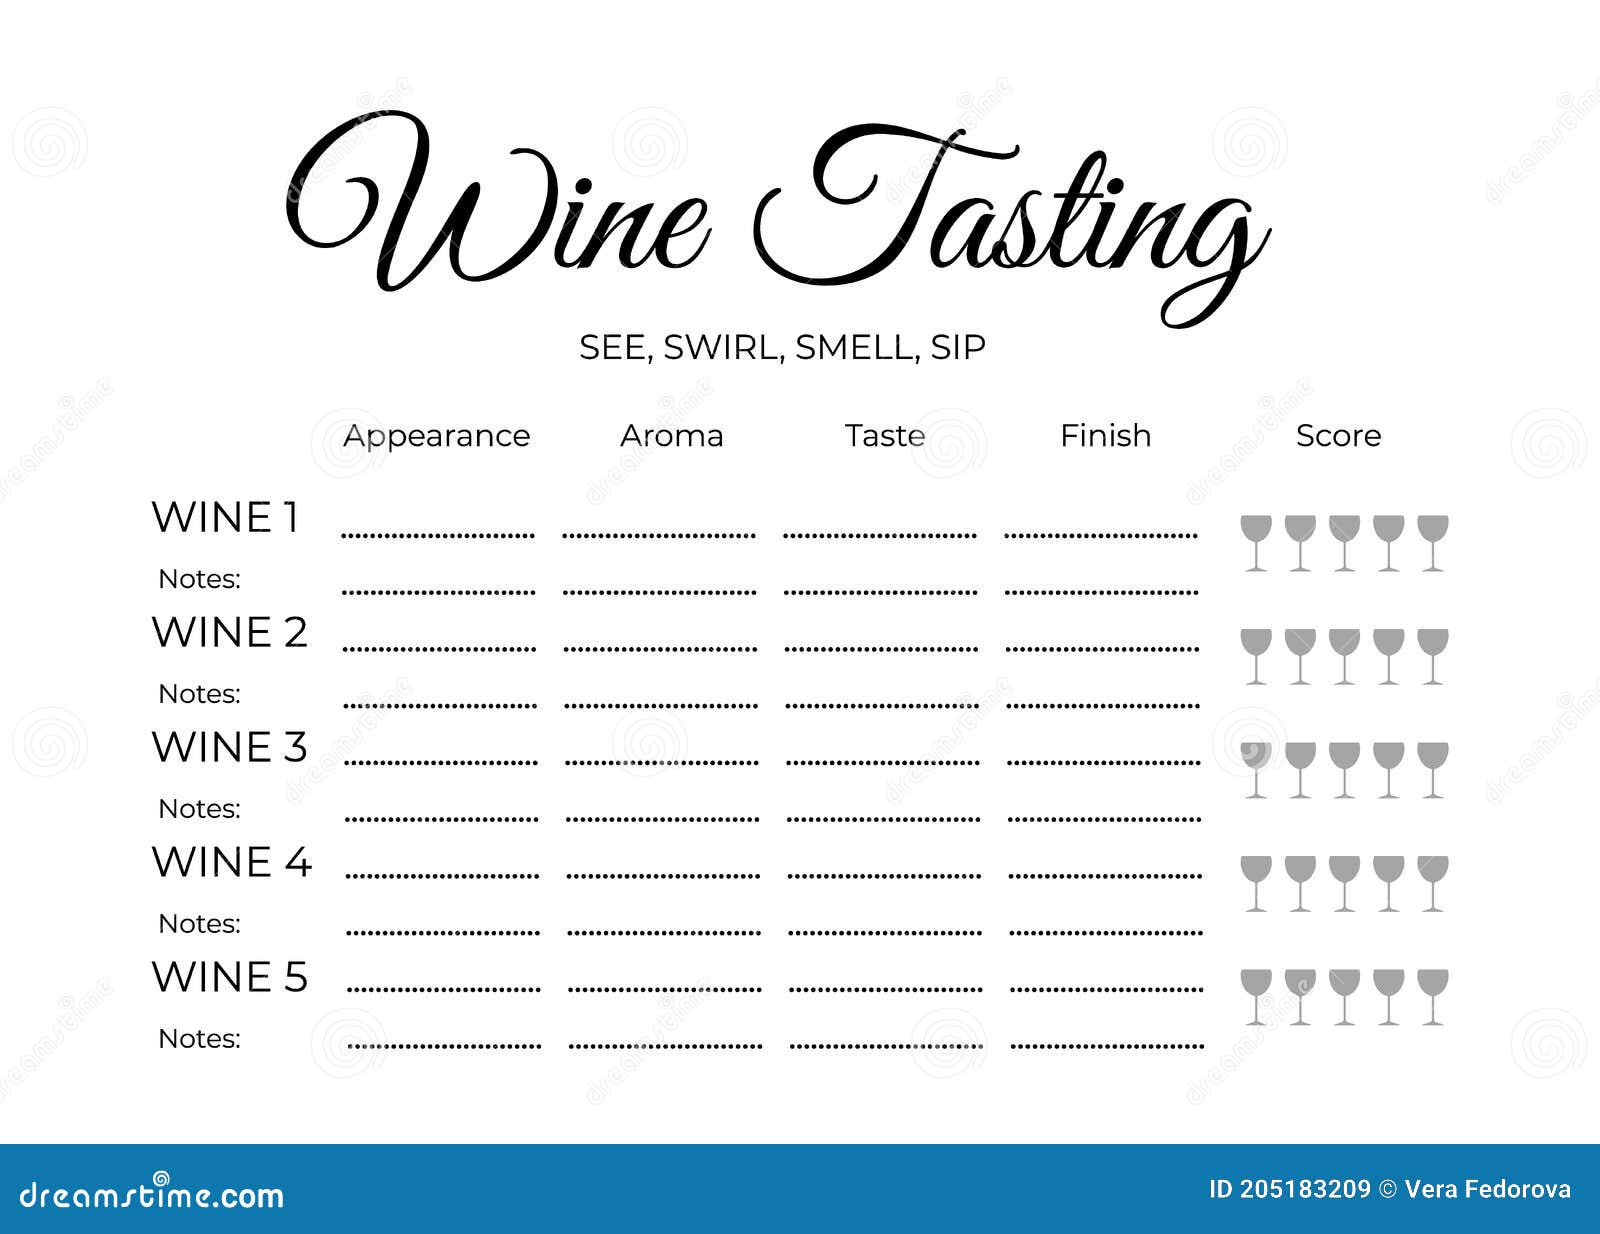 Wine Tasting Score Card. Stationary for Wine Themed Party, Winery In Wine Tasting Notes Template